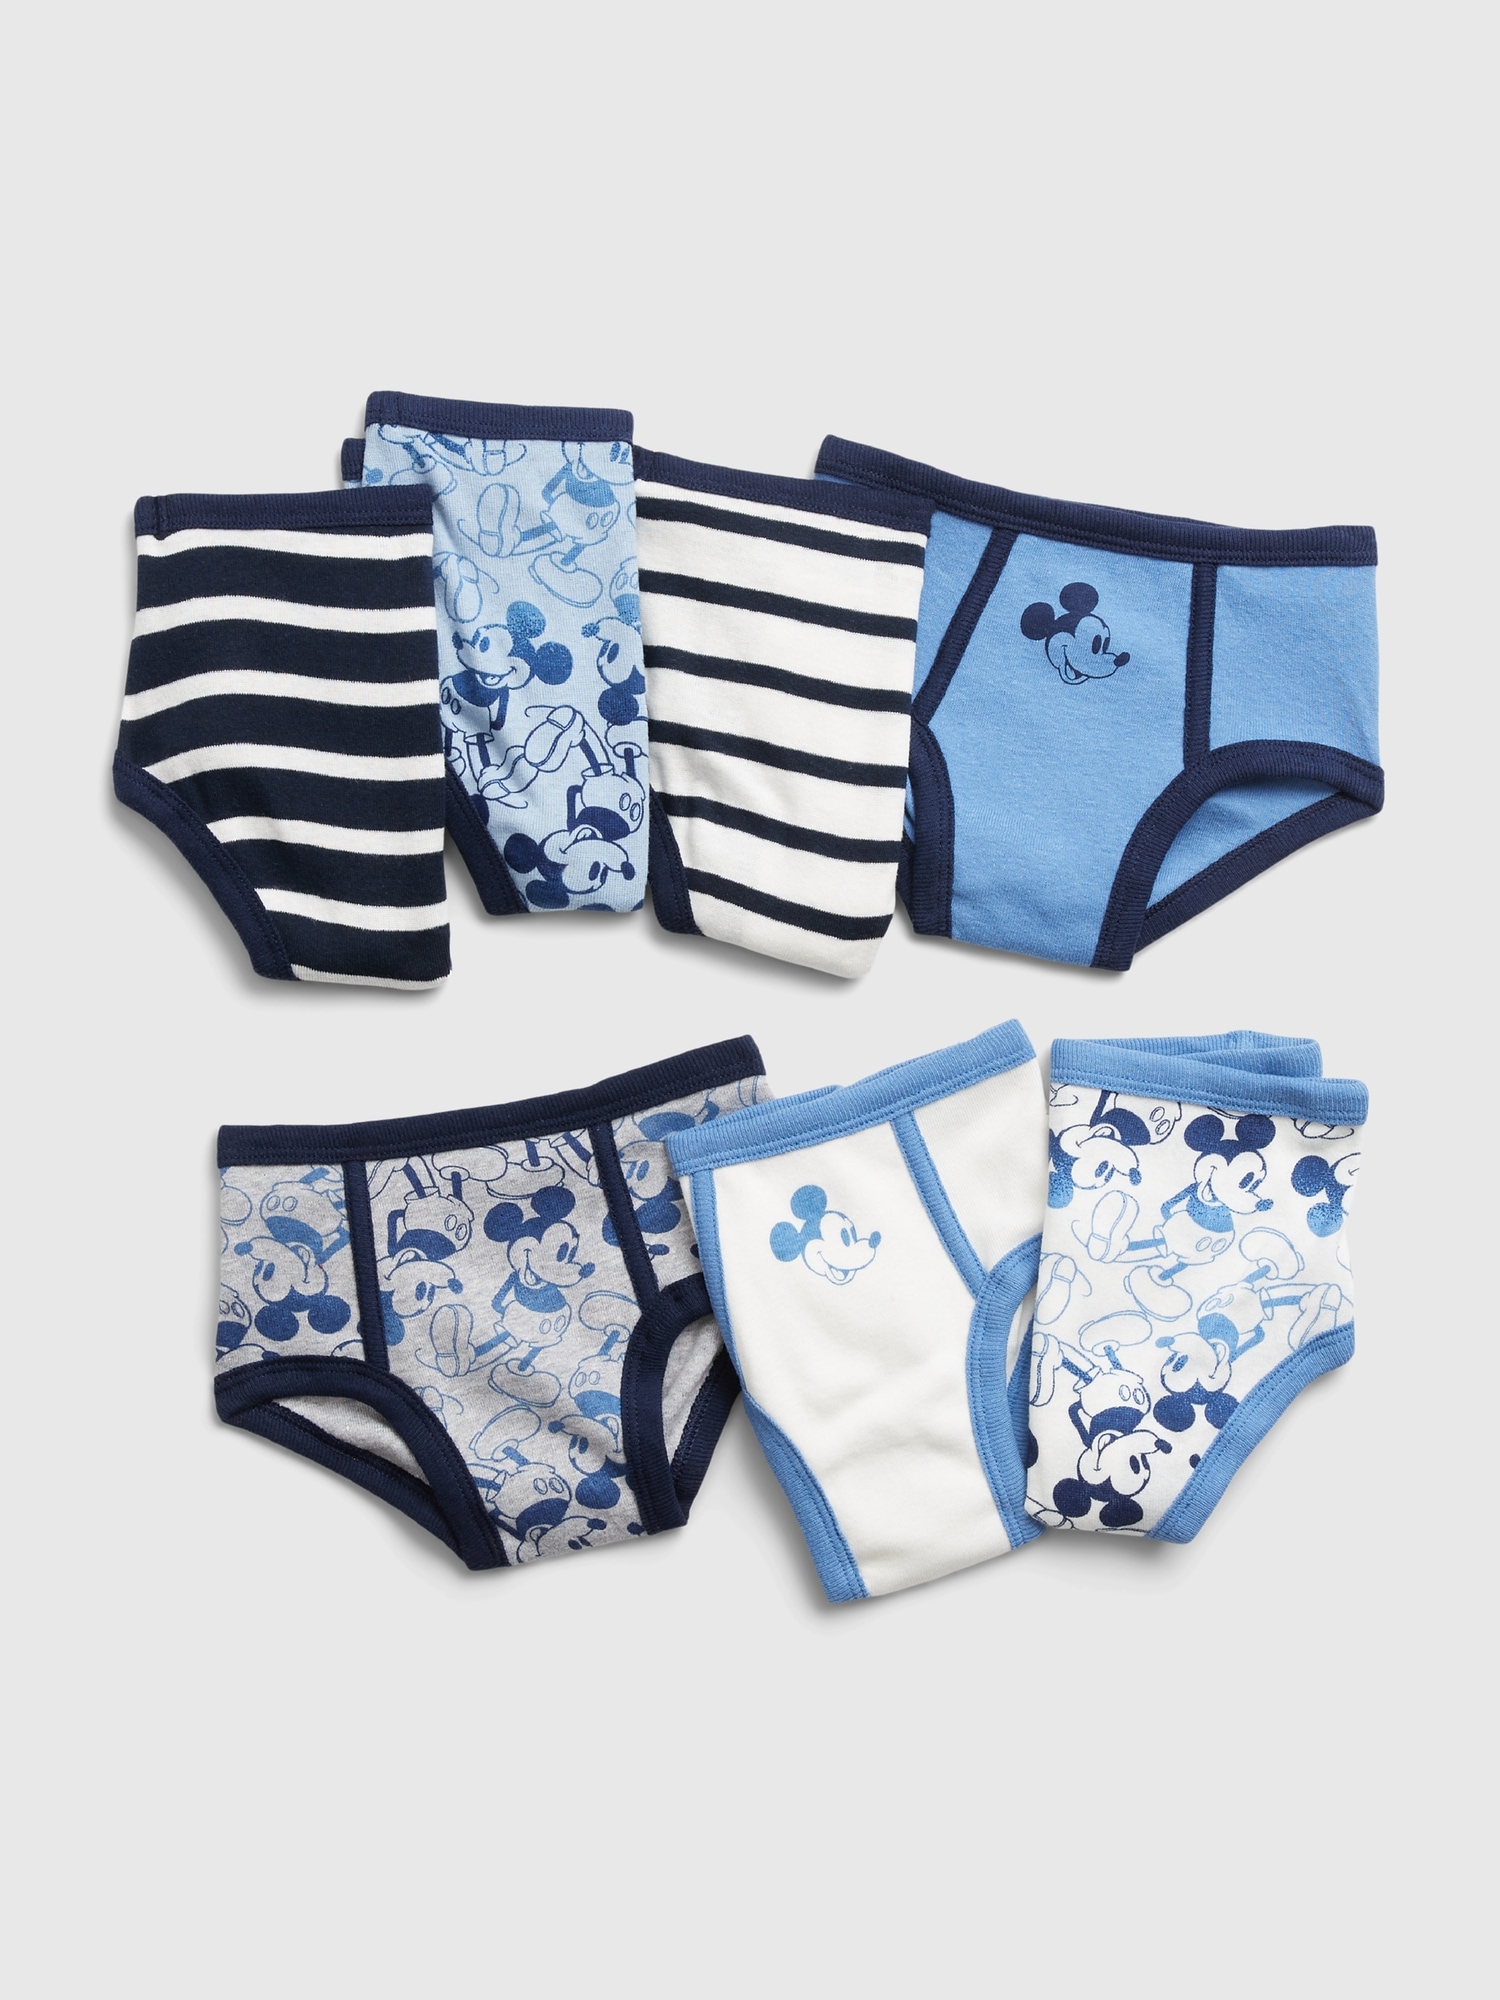 Mickey Mouse Briefs 3 Pack, Babies & Kids